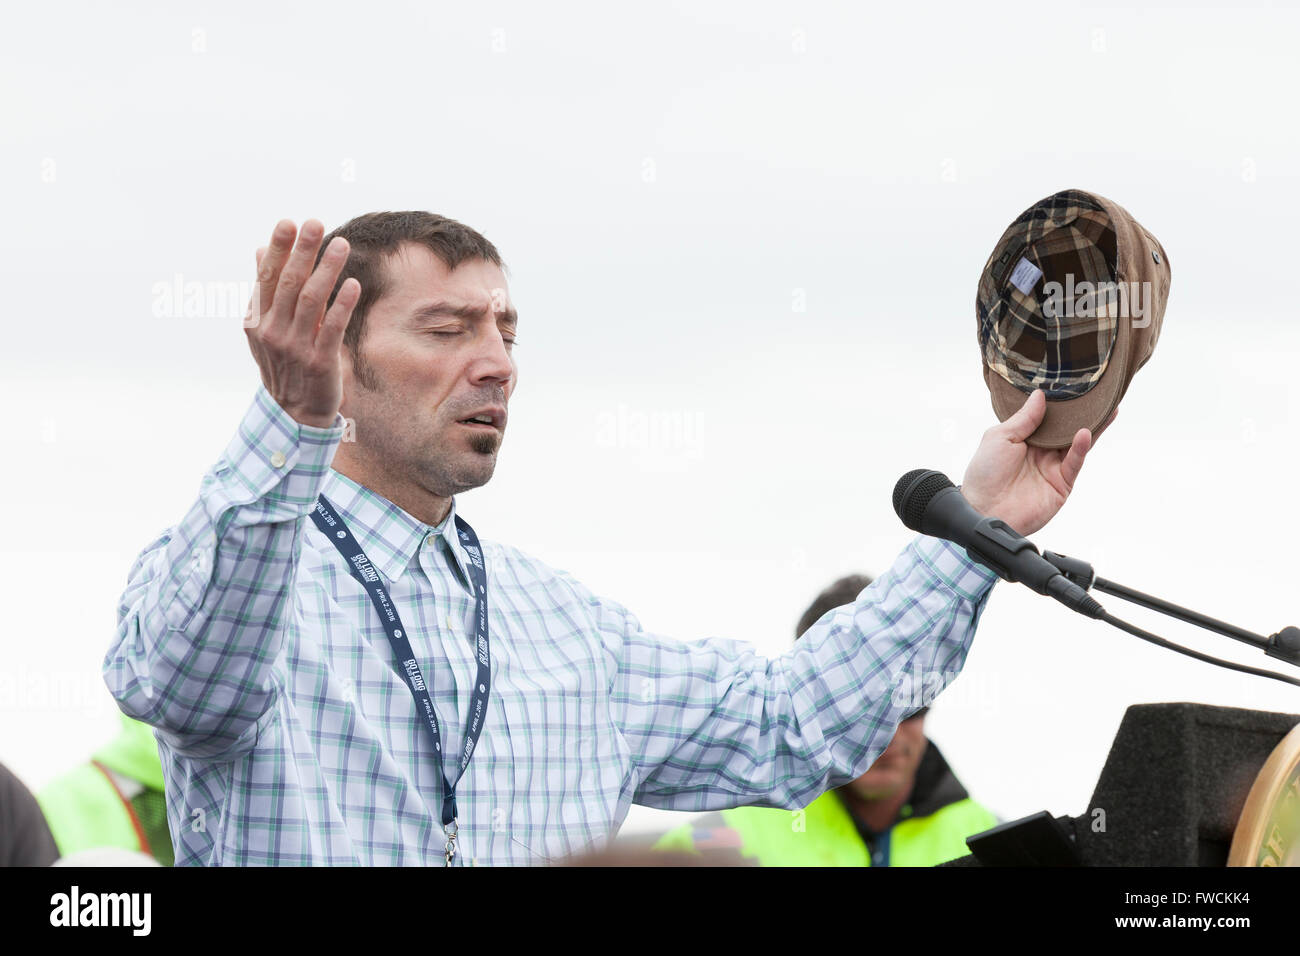 Seattle, Washington, USA. 2nd April, 2016. Muckleshoot tribe member opens the dedication of the new Evergreen Point Floating Bridge with a tribal blessing. The new Highway 520 bridge, the longest floating bridge in the world, opens to traffic in late April. Credit:  Paul Gordon/Alamy Live News Stock Photo